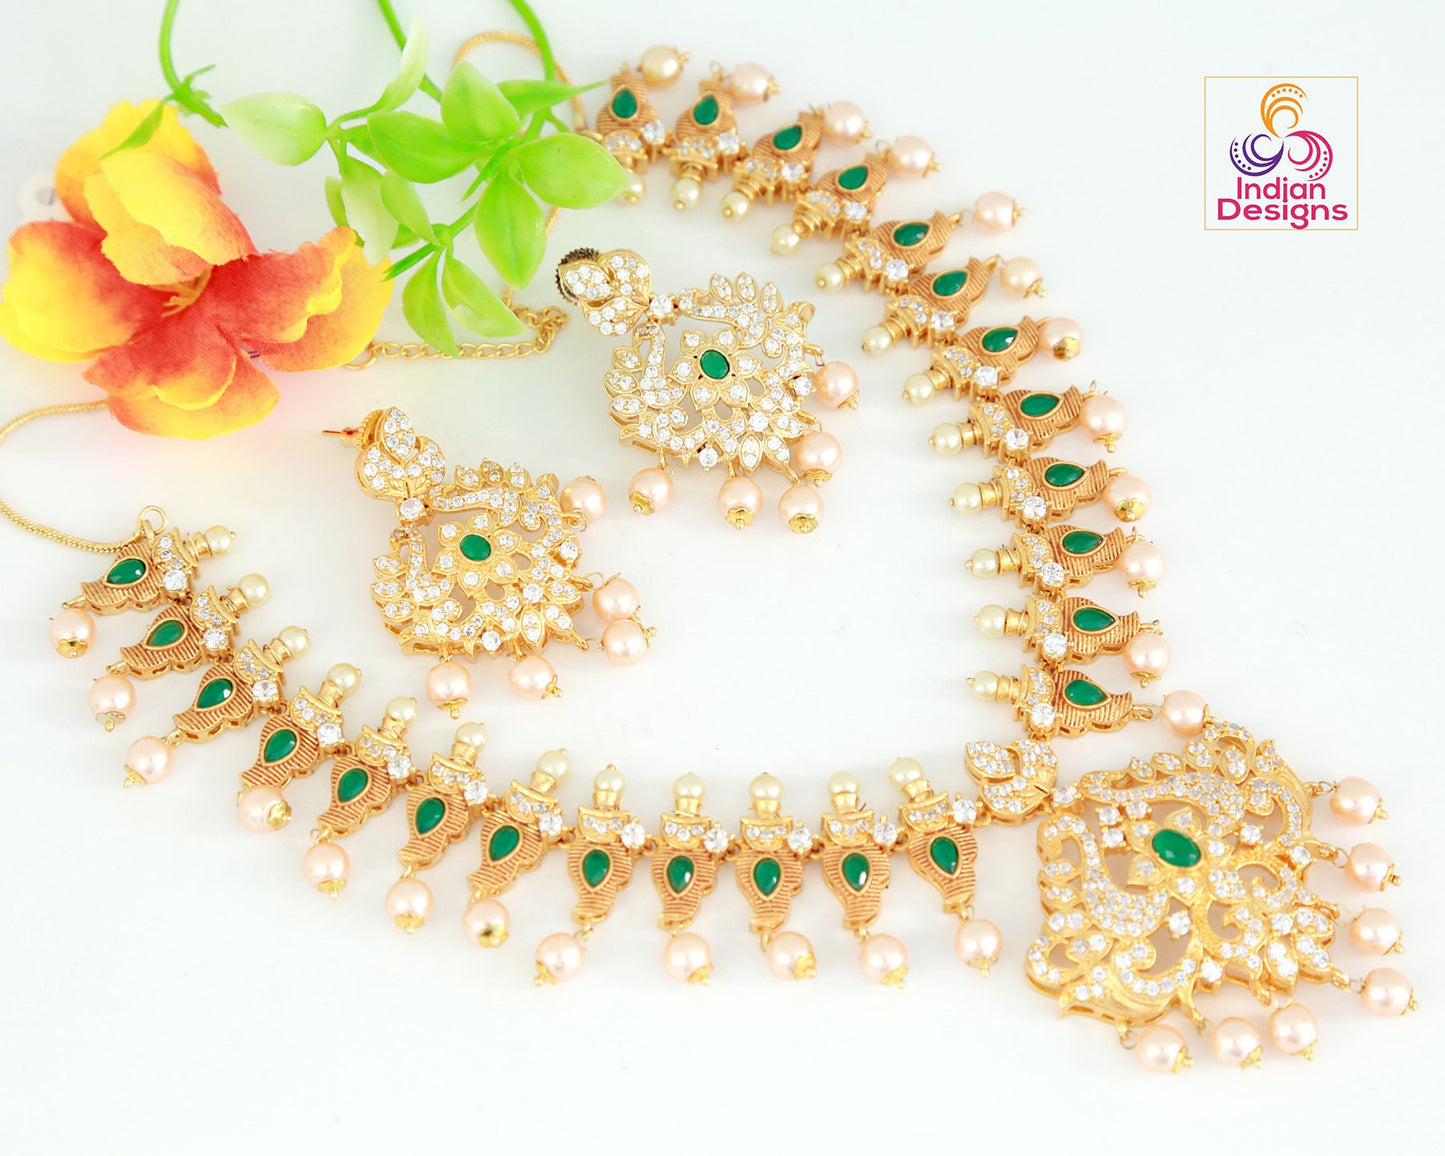 Matte finish gold Plated necklace and earring set, South Indian temple jewelry mango design necklace, ruby emerald necklace with Pearl drops